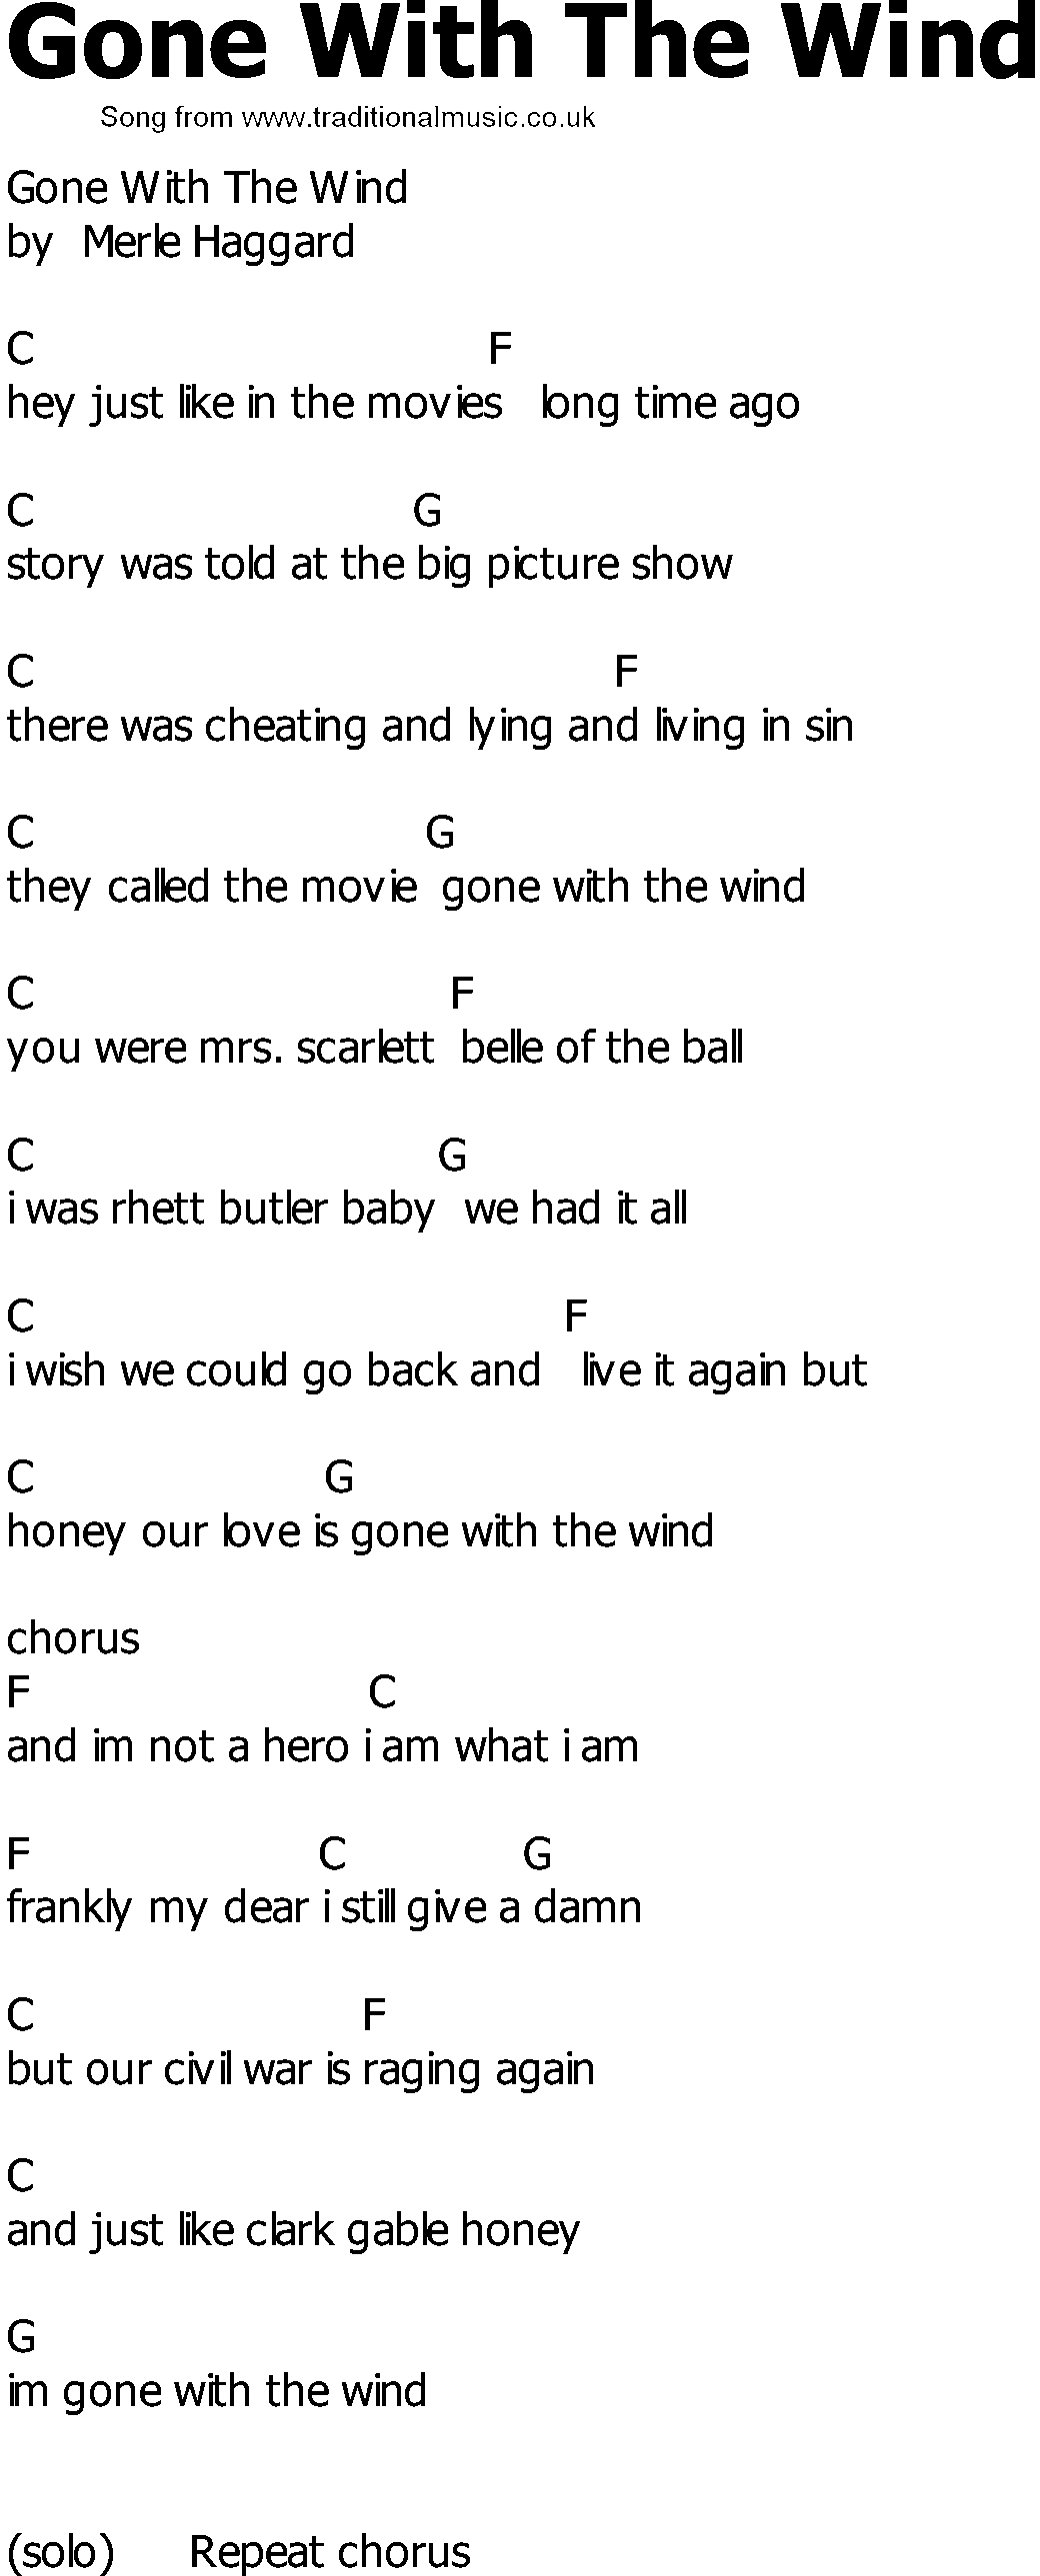 Old Country song lyrics with chords - Gone With The Wind